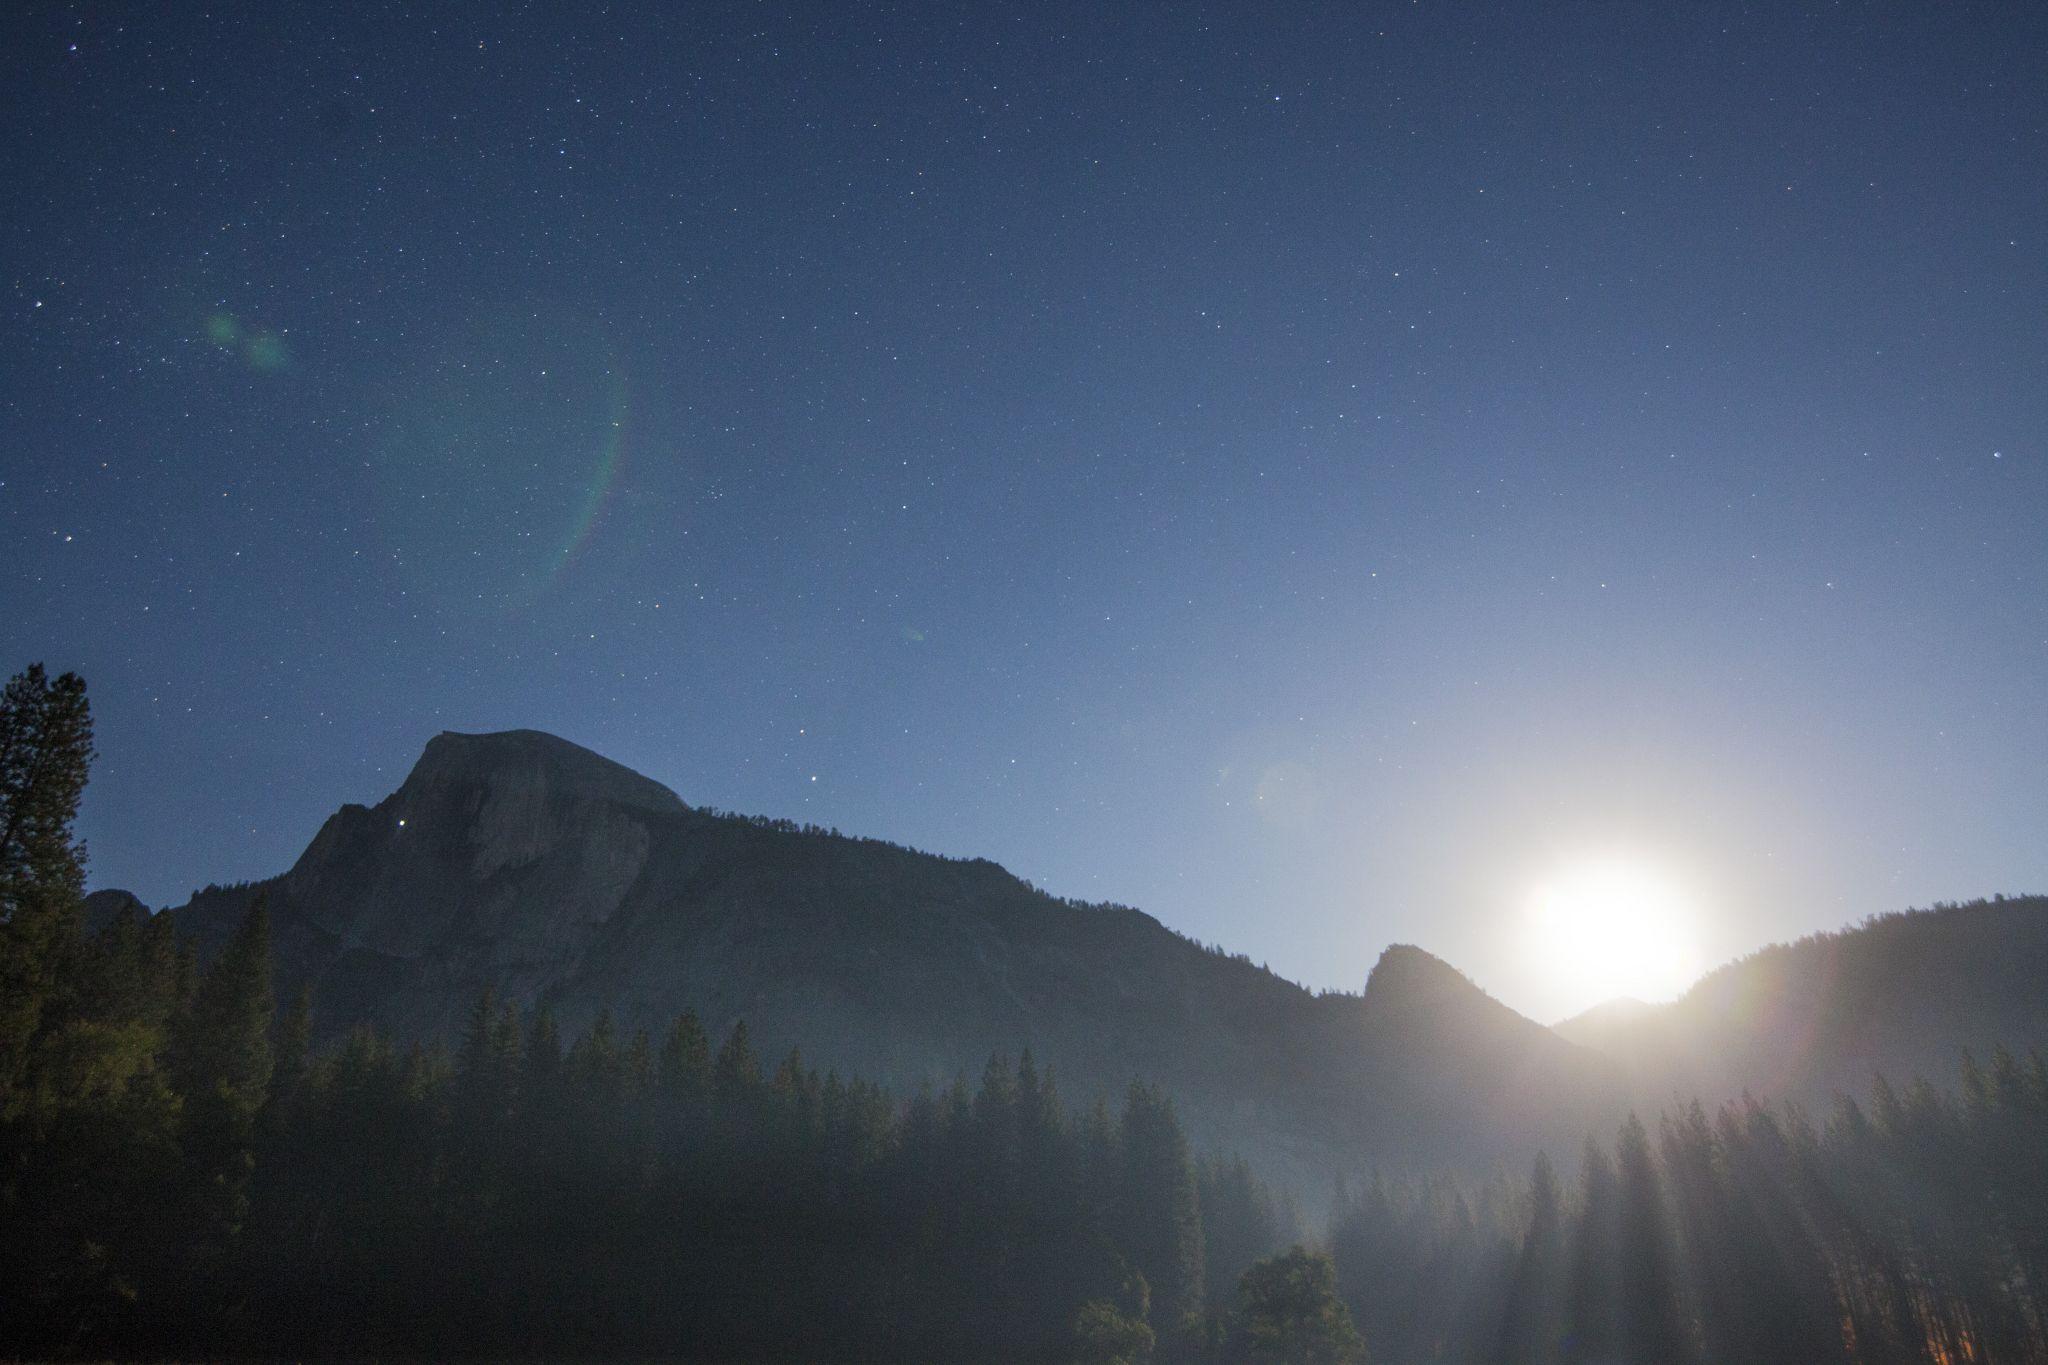 Full moon at the end of the summer solstice in Yosemite National Park. The headlamps of climbers can be seen on Half Dome. Courtesy of Nevin Fowler)